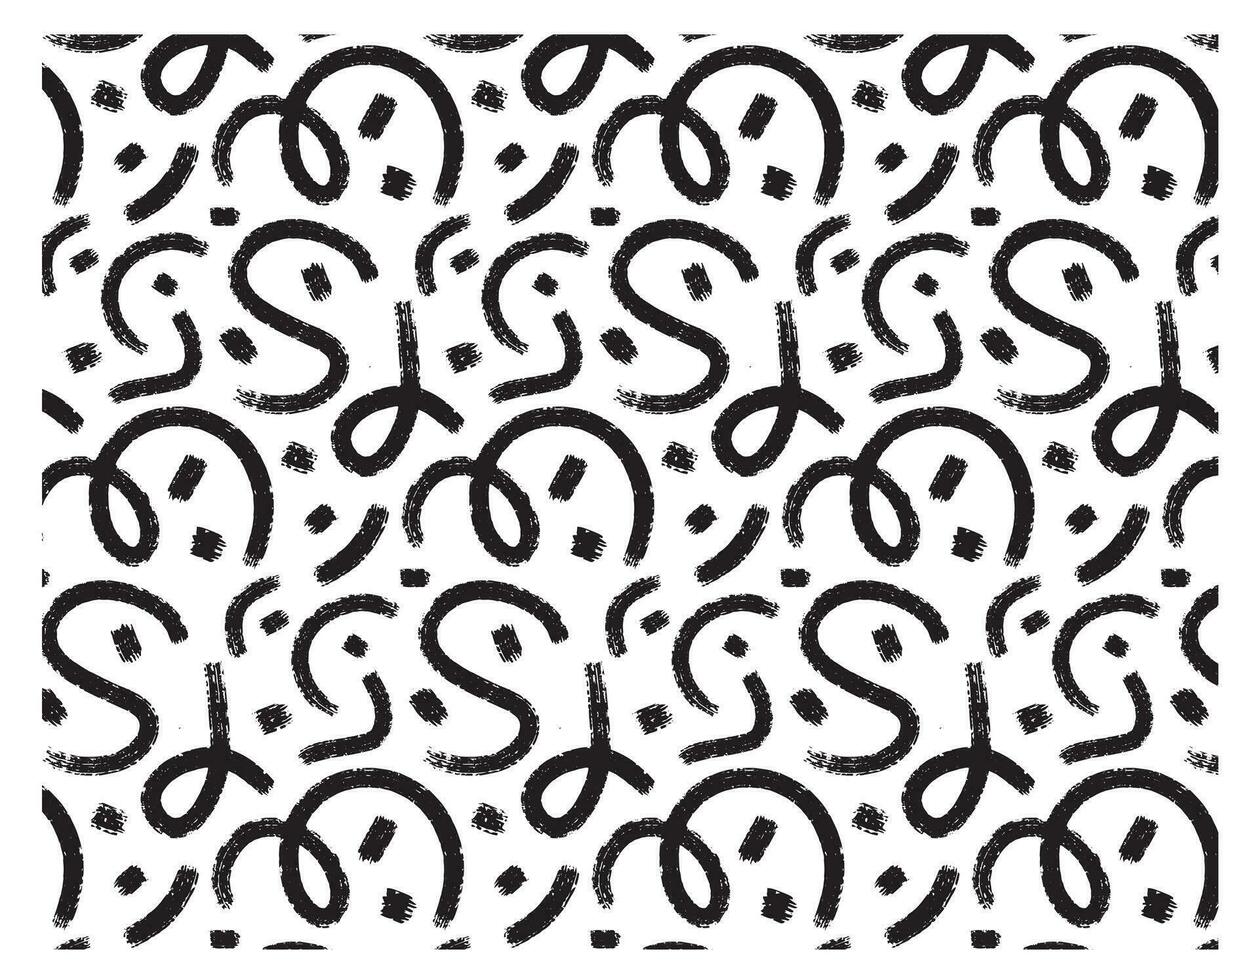 brush strokes waves, spots, doodles vector seamless pattern. Freehand scribble with black paint brush, abstract ink background.